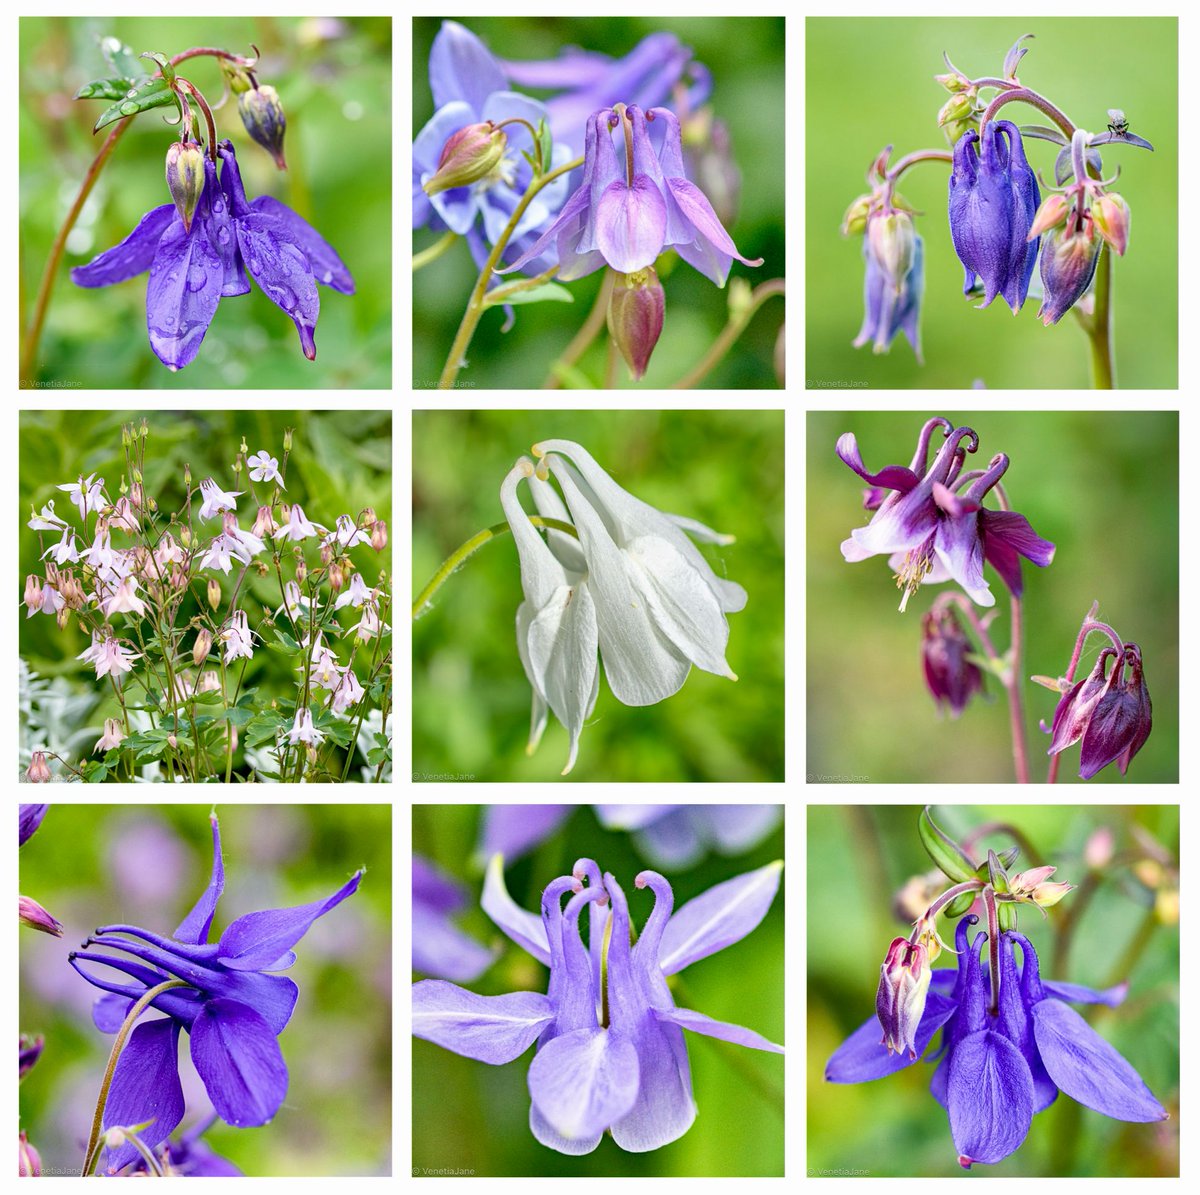 Common names for Aquilegia include granny's bonnet, columbine & doves-at-the-fountain. In olden times it was called “Herb Leonis” & believed to be a favourite of lions. It was said that rubbing its juice on your hands would bestow you with the courage of a lion! #FolkloreThursday